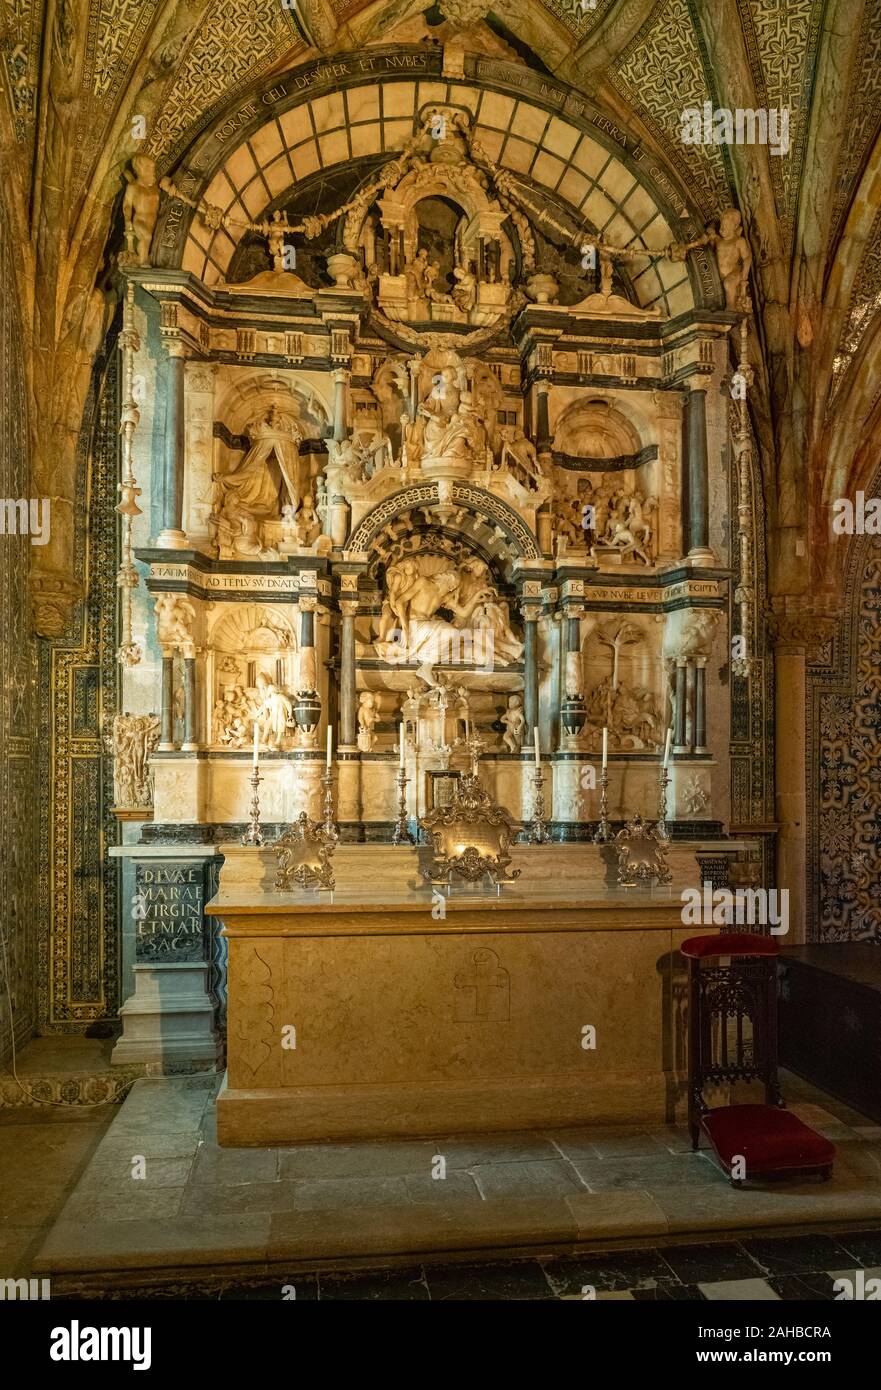 Sintra, Portugal - 21 August 2019: Main altar in the Chapel of Our Lady of Pena at Pena Palace Stock Photo